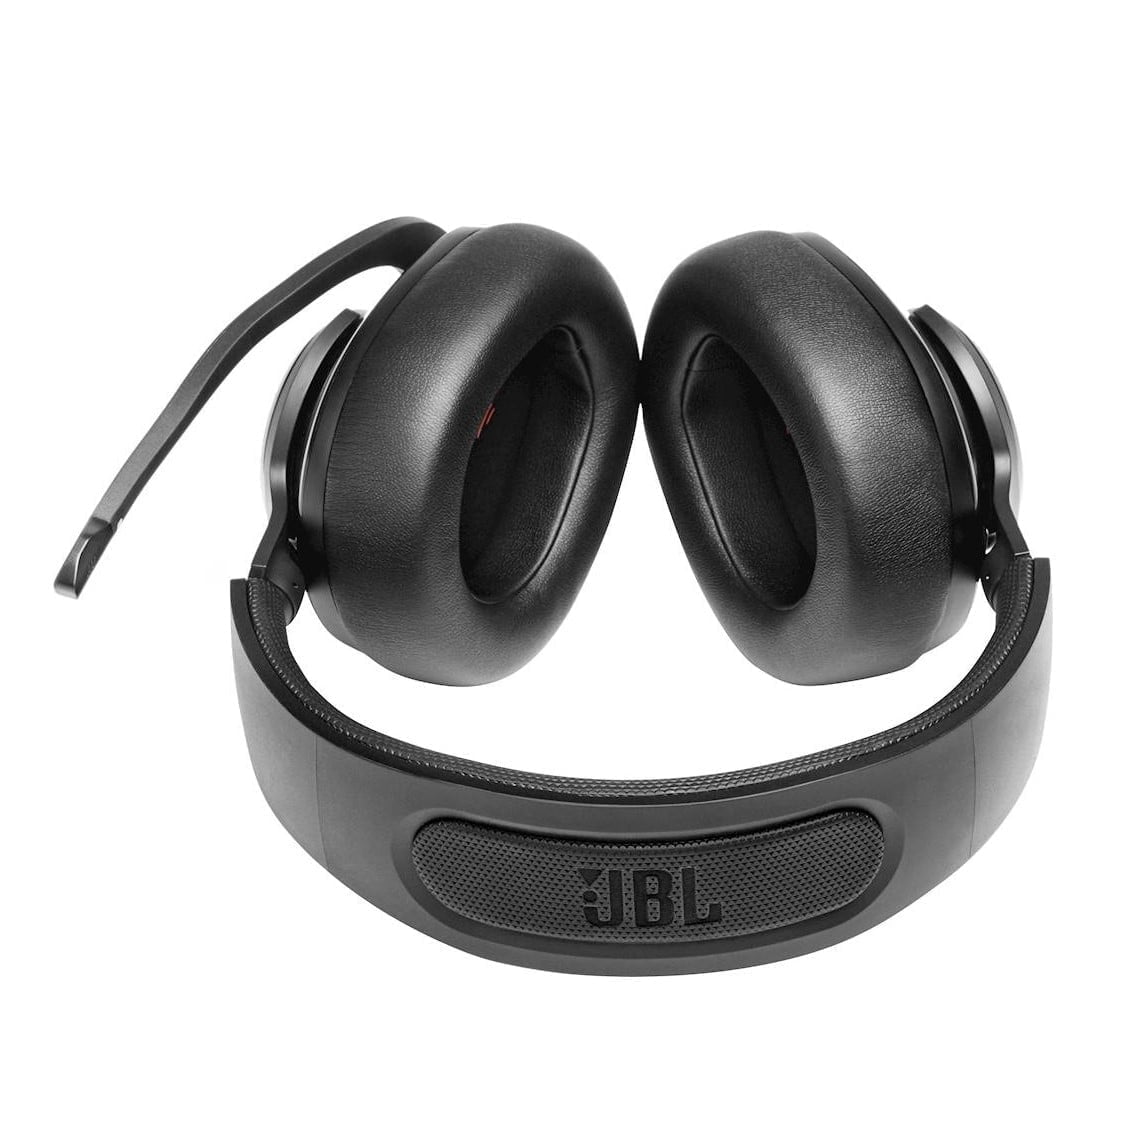 6408569Cv16D Jbl &Lt;H1 Class=&Quot;Headline&Quot; Data-Productname=&Quot;Jbl Quantum 400&Quot; Data-Gtm-Vis-Has-Fired-7462060_677=&Quot;1&Quot; Data-Gtm-Vis-Has-Fired-7462060_678=&Quot;1&Quot;&Gt;Jbl Quantum 400 Usb Over-Ear Pc Gaming Headset With Game-Chat Dial&Lt;/H1&Gt; Https://Www.youtube.com/Watch?V=5-Exosfwfhe Experience High-Quality Acoustics With This Jbl Quantum 400 Over-Ear Wired Gaming Headset. The Voice Focus Boom Microphone Enables Clear Communication, While The Memory Foam Ear Cushions Keep You Comfortable During Extended Gaming Sessions. This Jbl Quantum 400 Over-Ear Wired Gaming Headset Features Multiplatform Compatibility For Flexibility And Quantumsound Signature Technology To Enhance Audio Clarity. Jbl Quantum Jbl Quantum 400 Usb Over-Ear Pc Gaming Headset With Game-Chat Dial